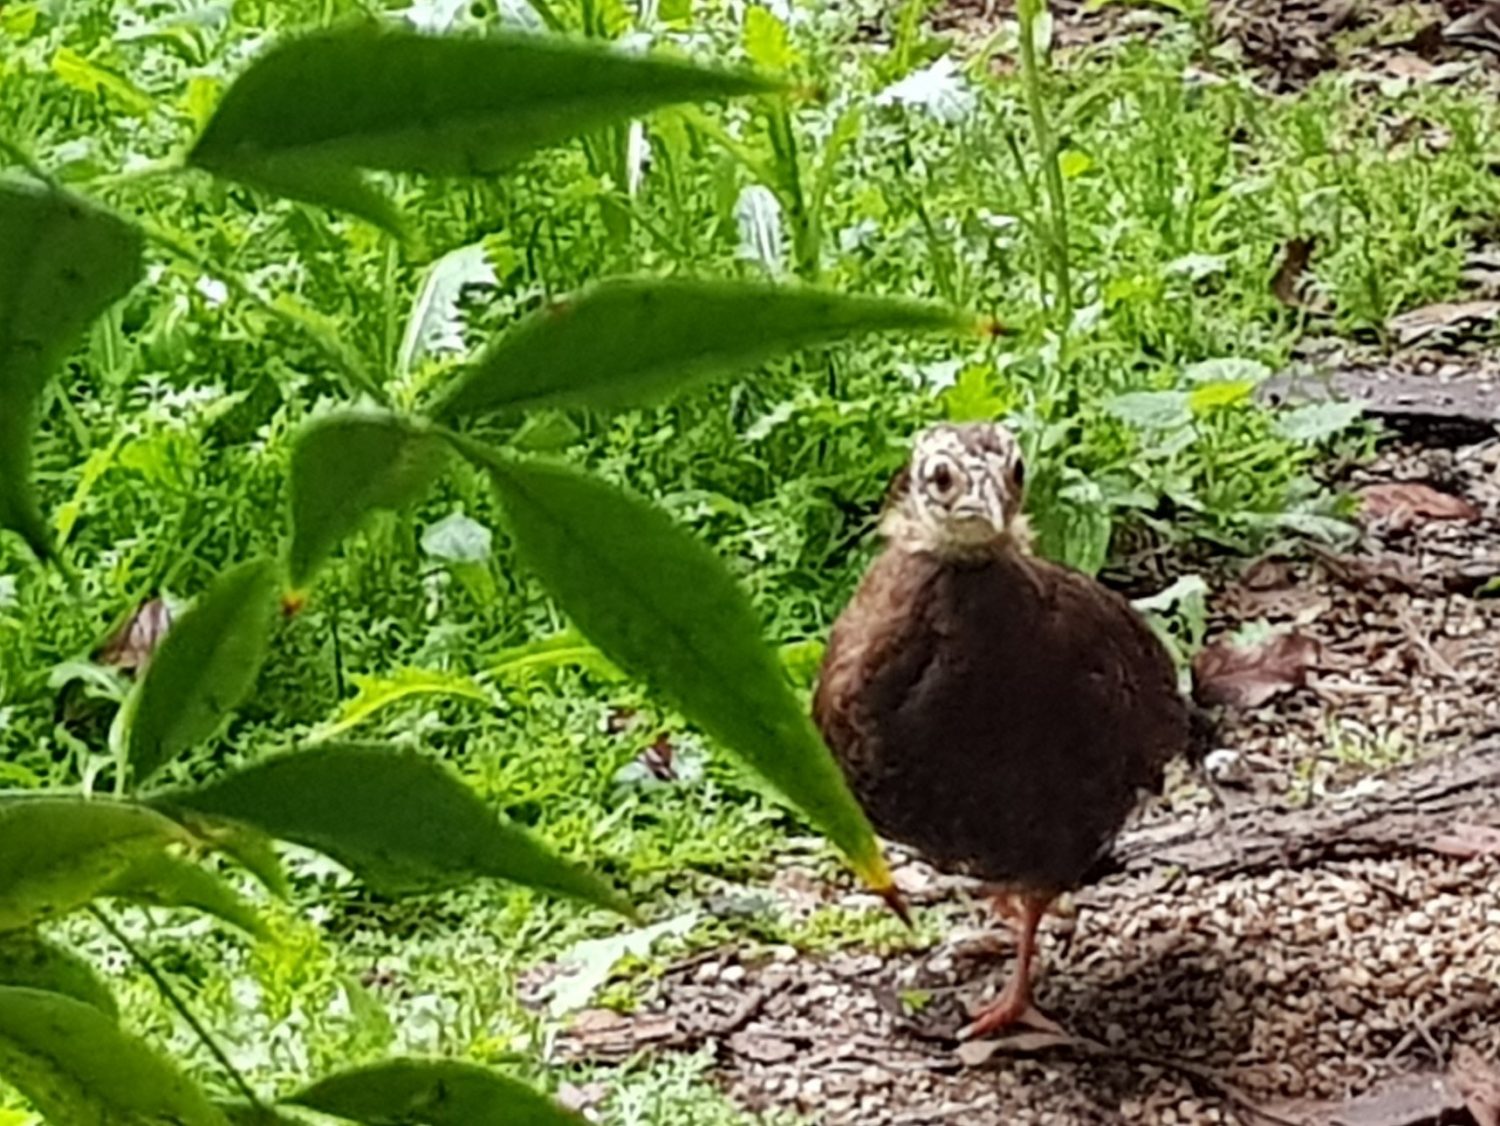 One Edwards Pheasant Chick looking at the camera